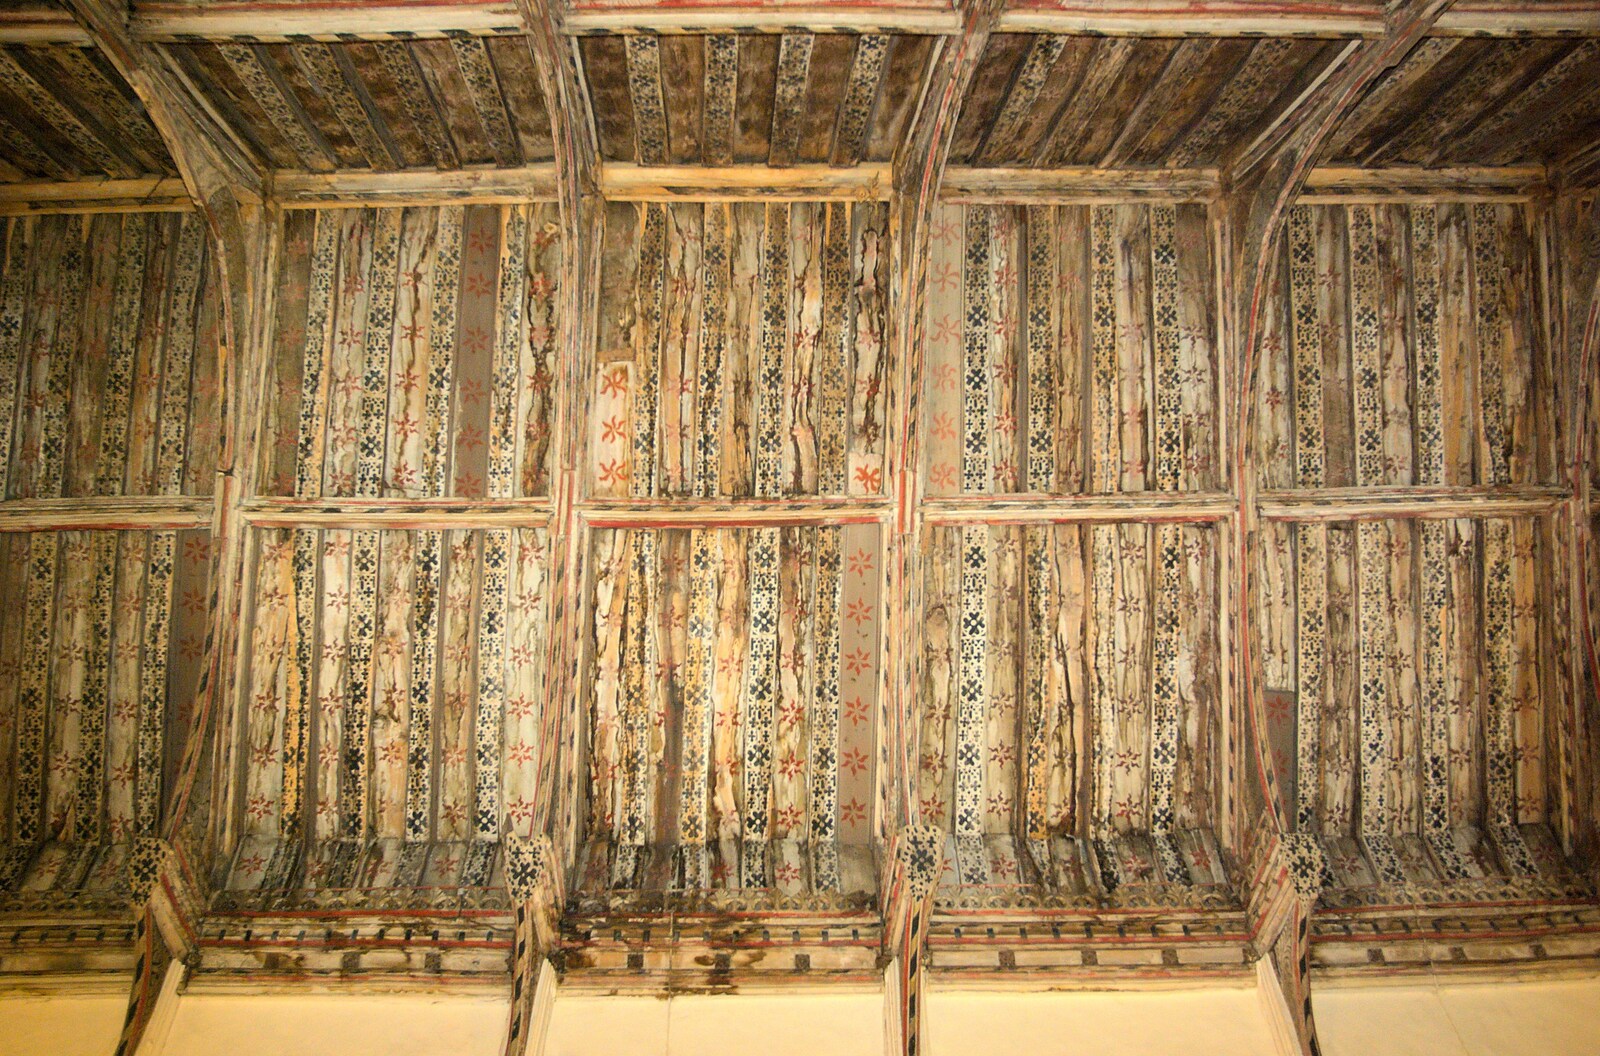 The interesting painted roof of Palgrave Church from Fred's First Nativity, St. Peter's Church, Palgrave, Suffolk - 8th December 2011